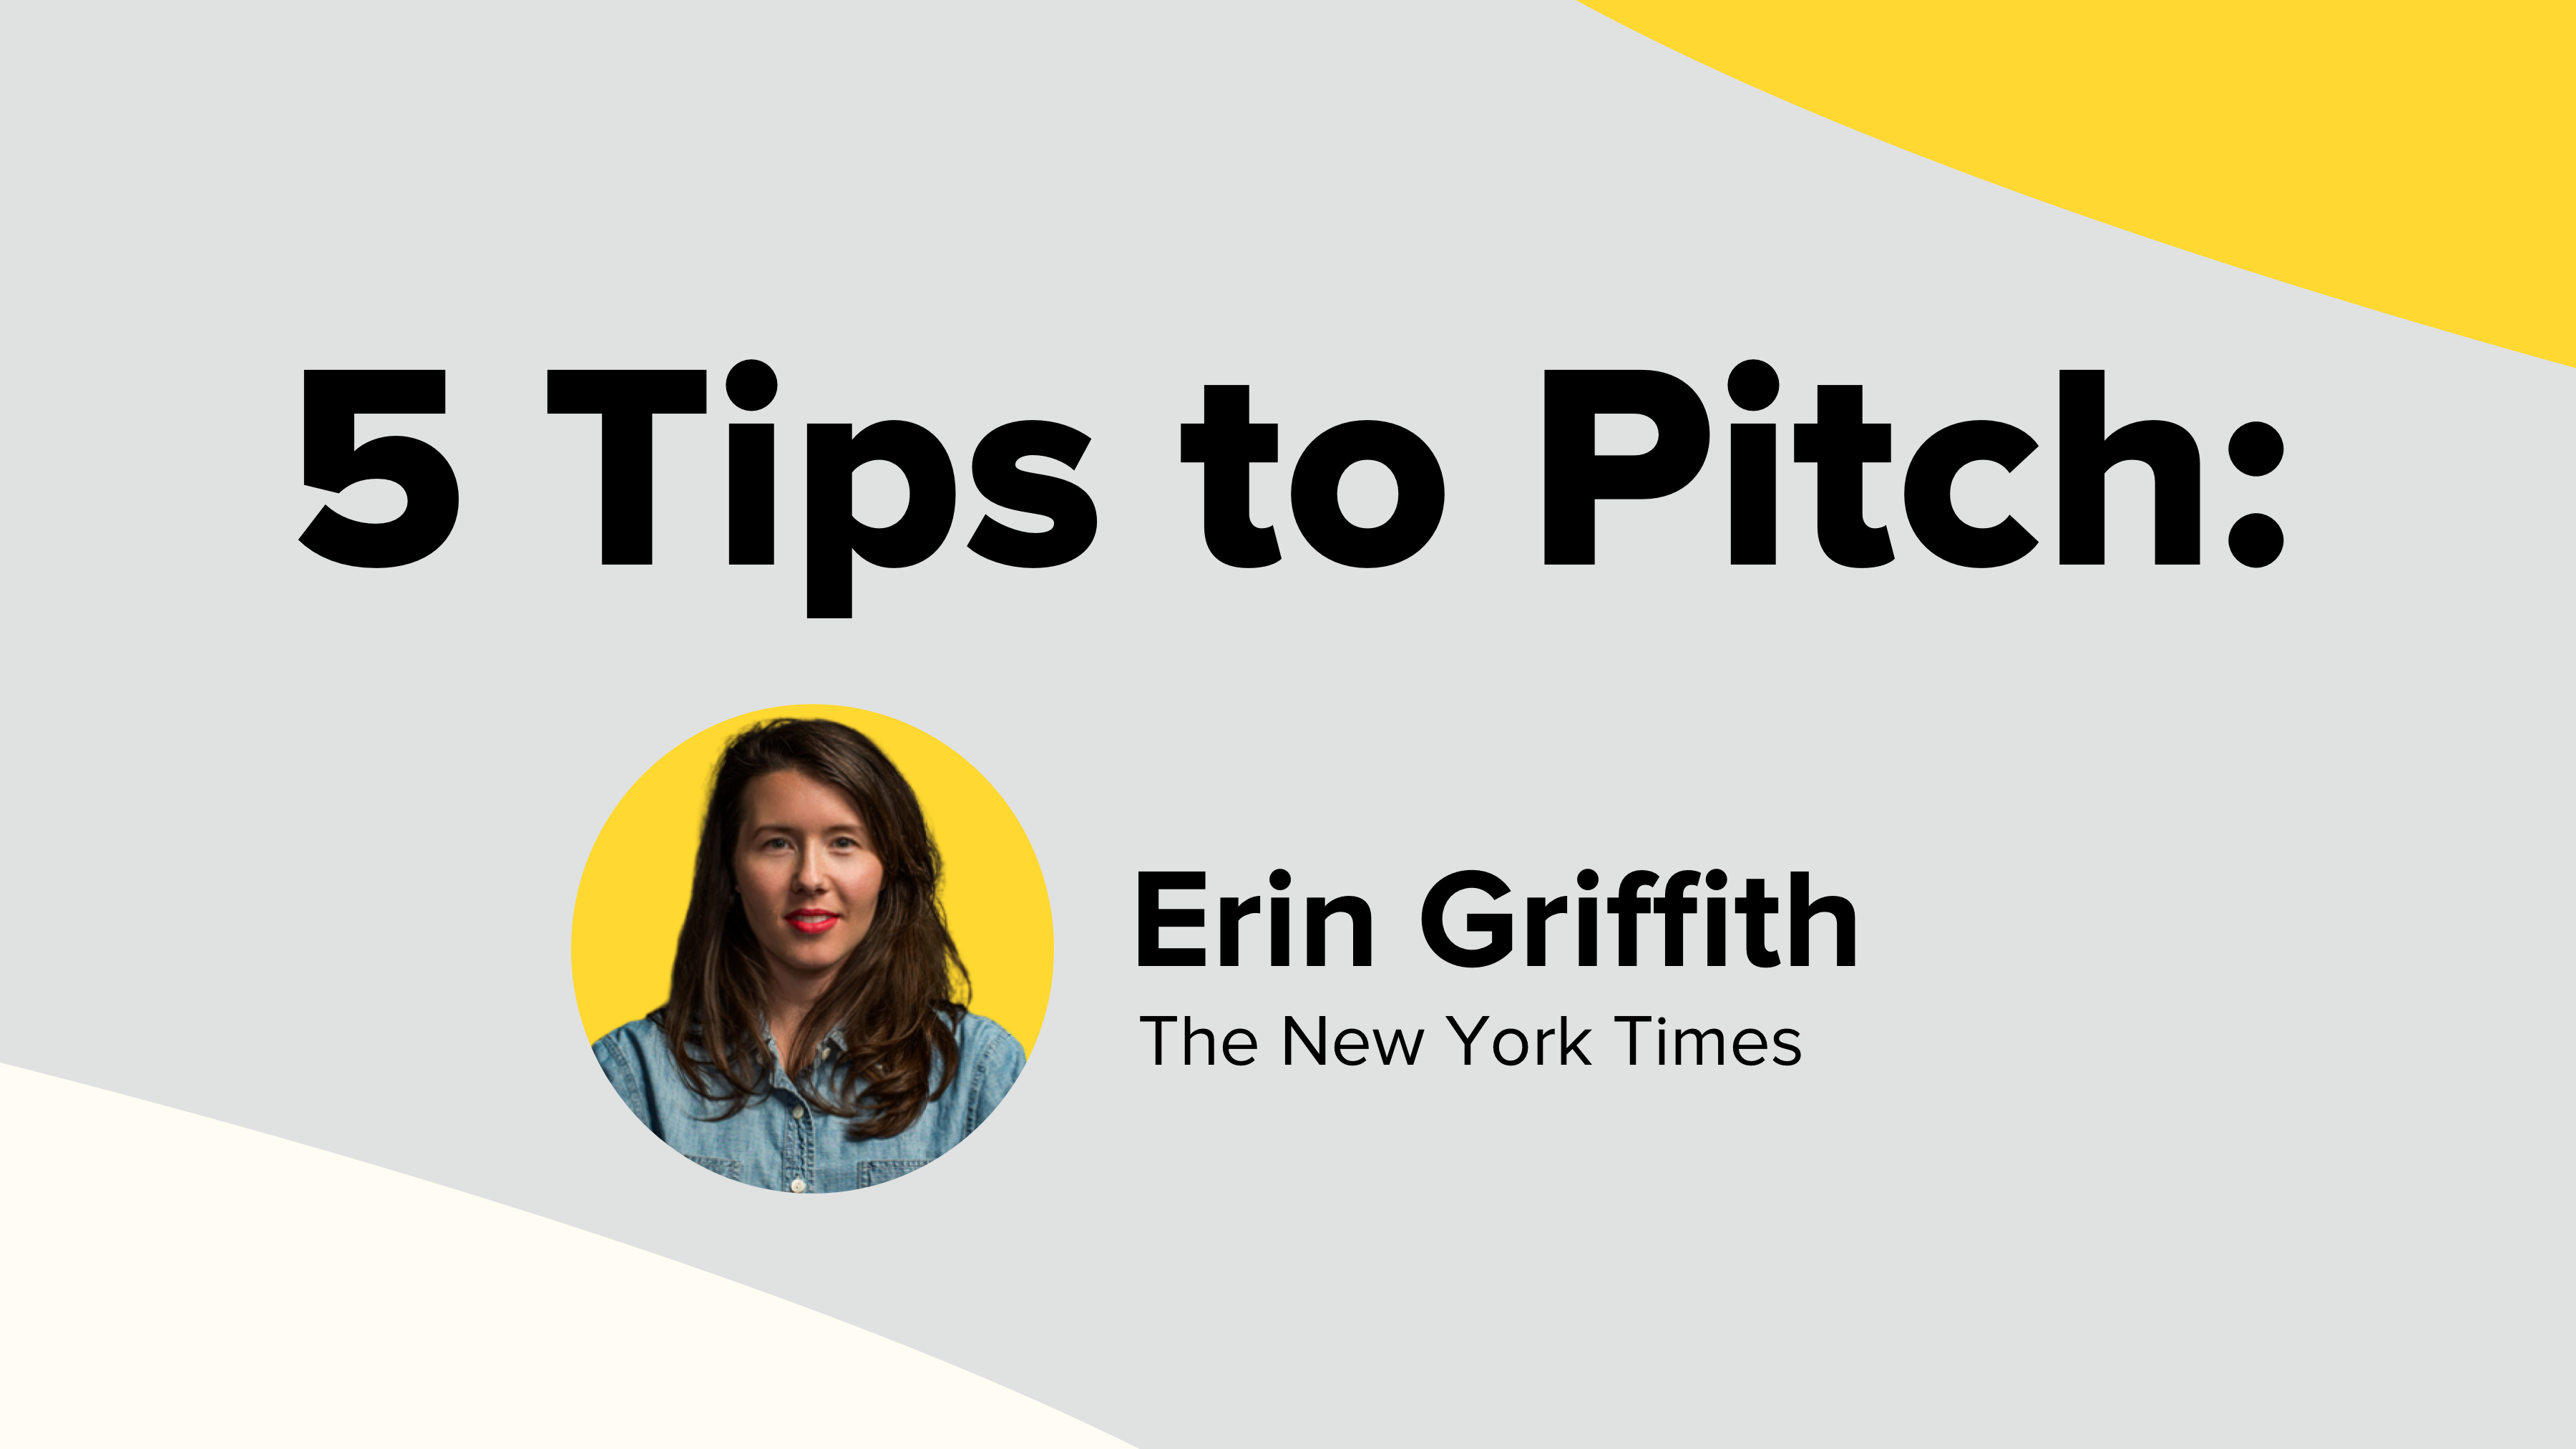 5 Tips to Pitch Erin Griffith of NYT